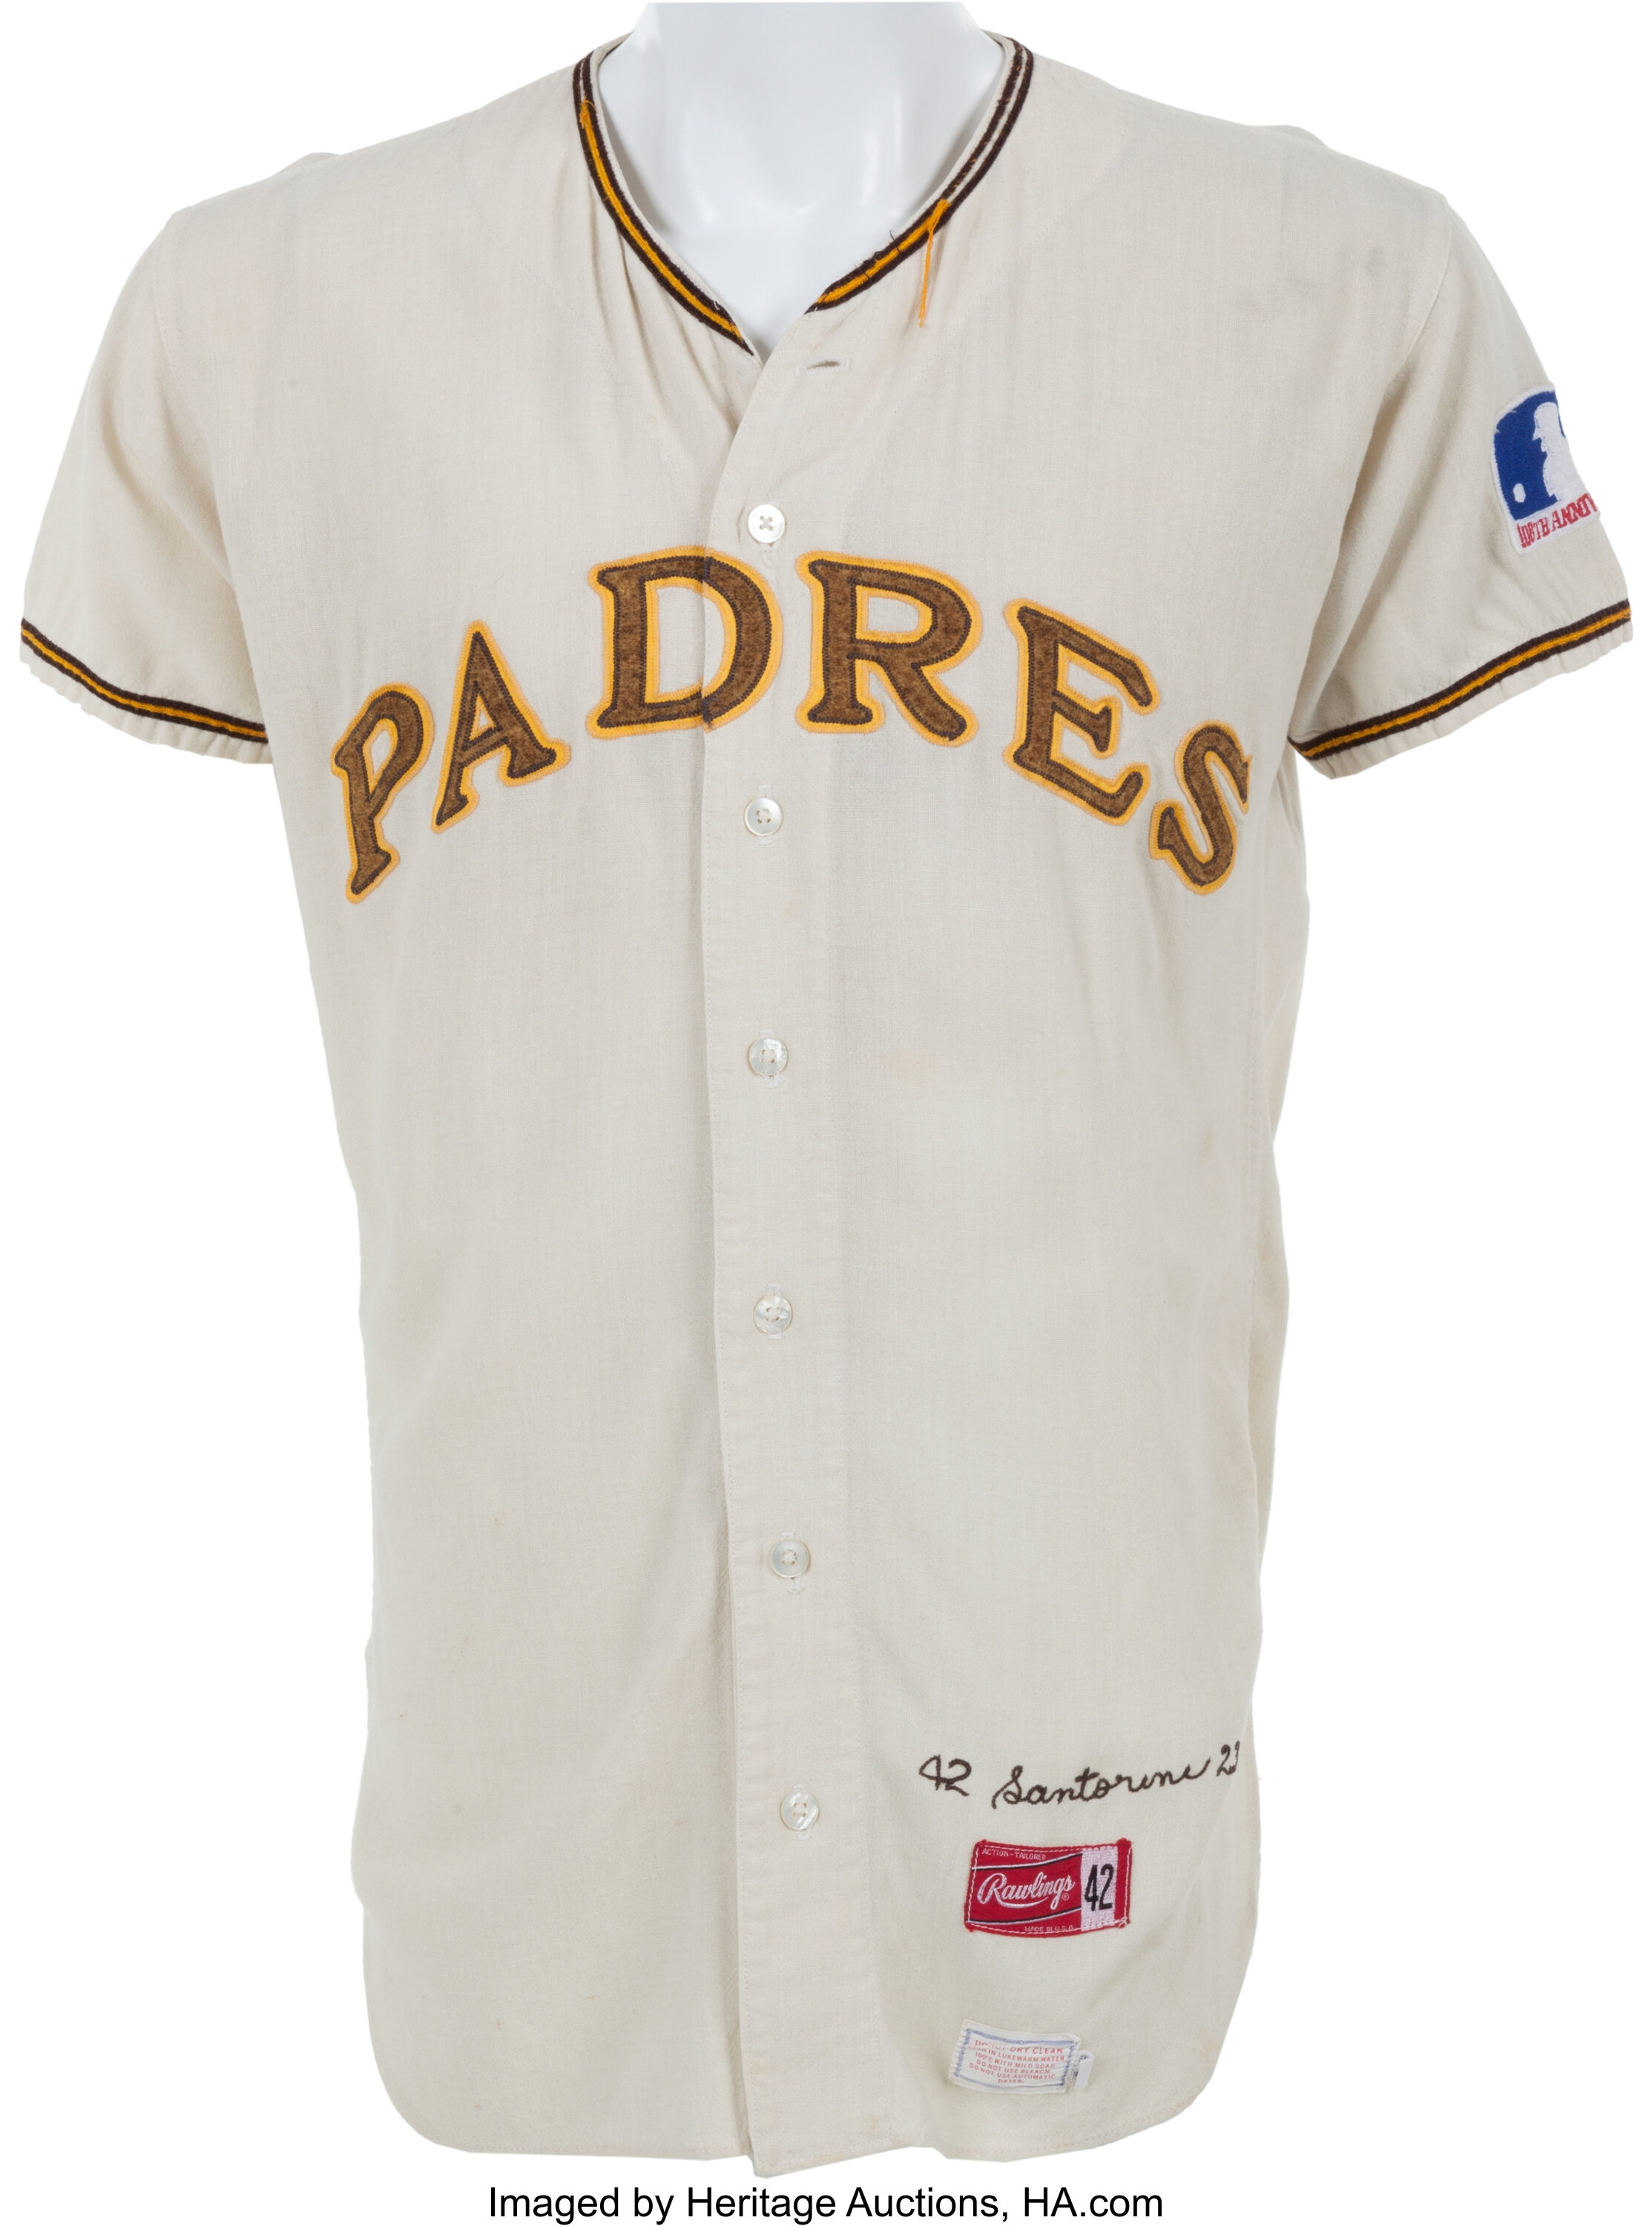 San Diego Padres Blank Game Issued White Jersey SDP0709 - Game